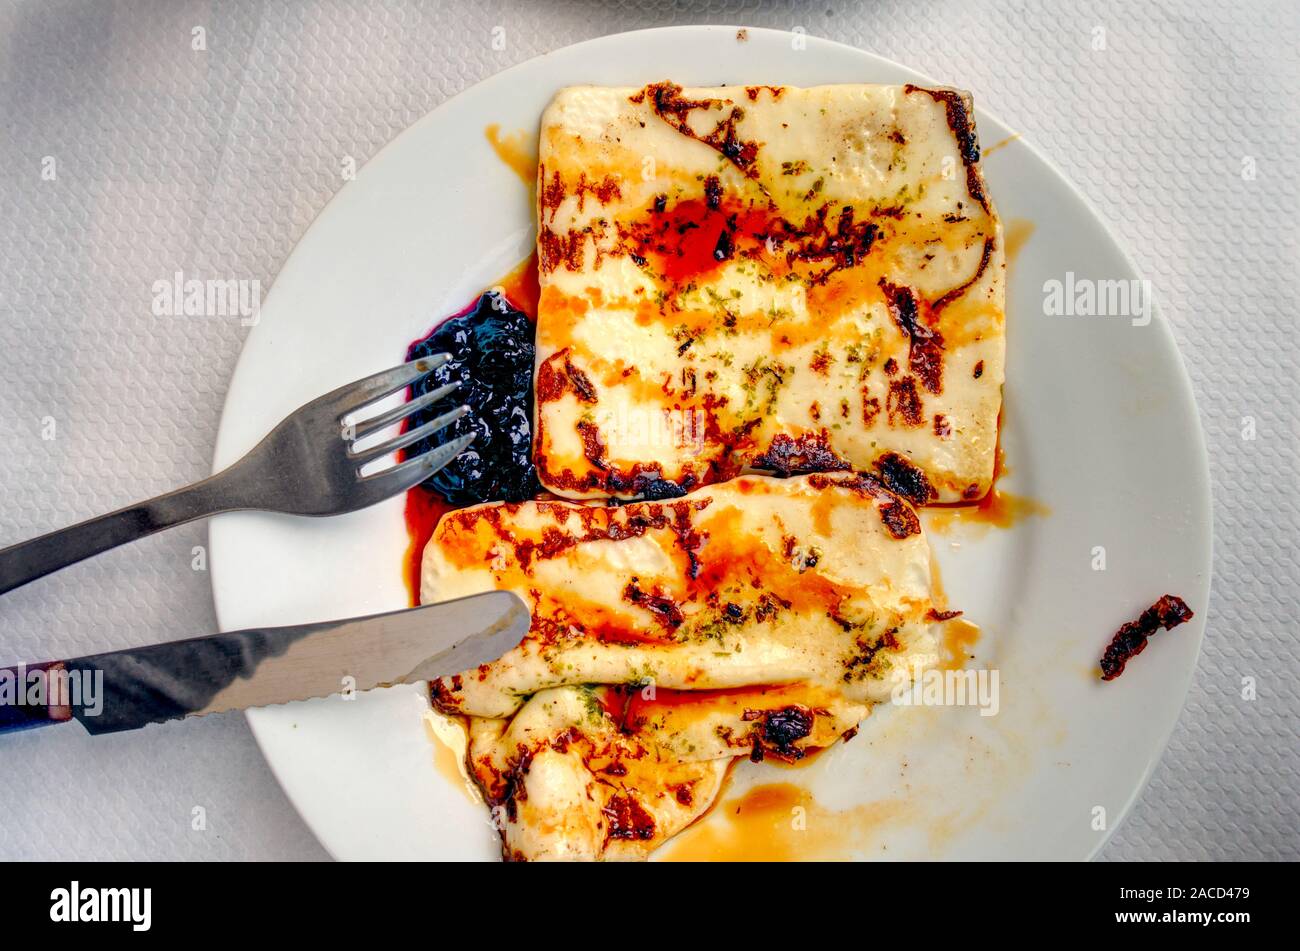 Grilled Cheese with Mojo, Typical dish from Canary Islands Stock Photo